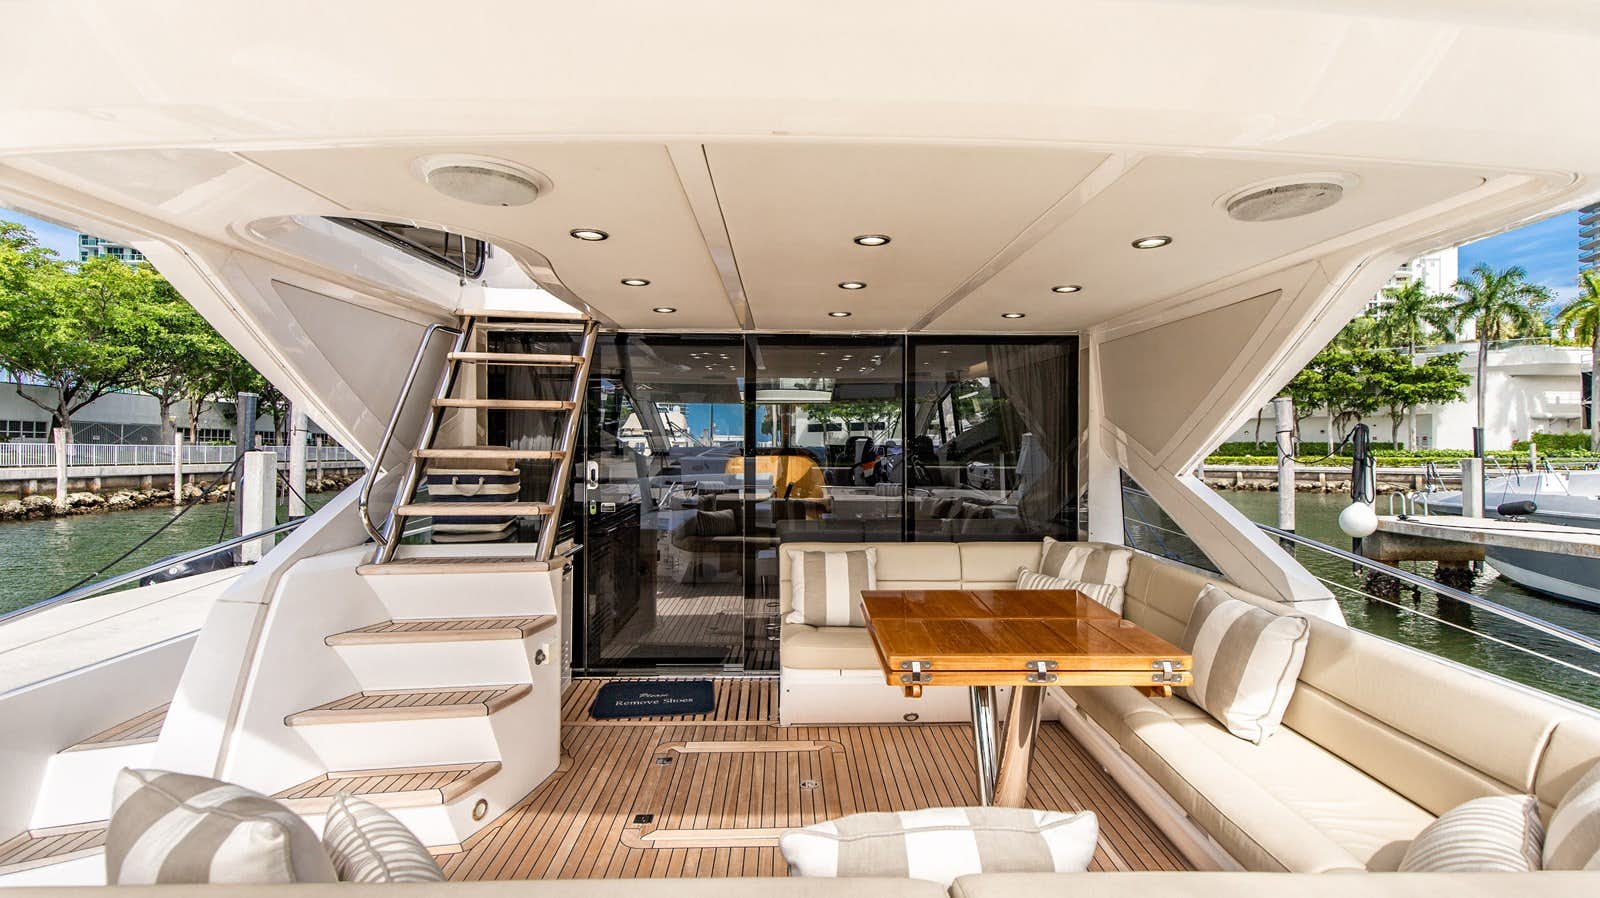 Accrewed interest
Yacht for Sale